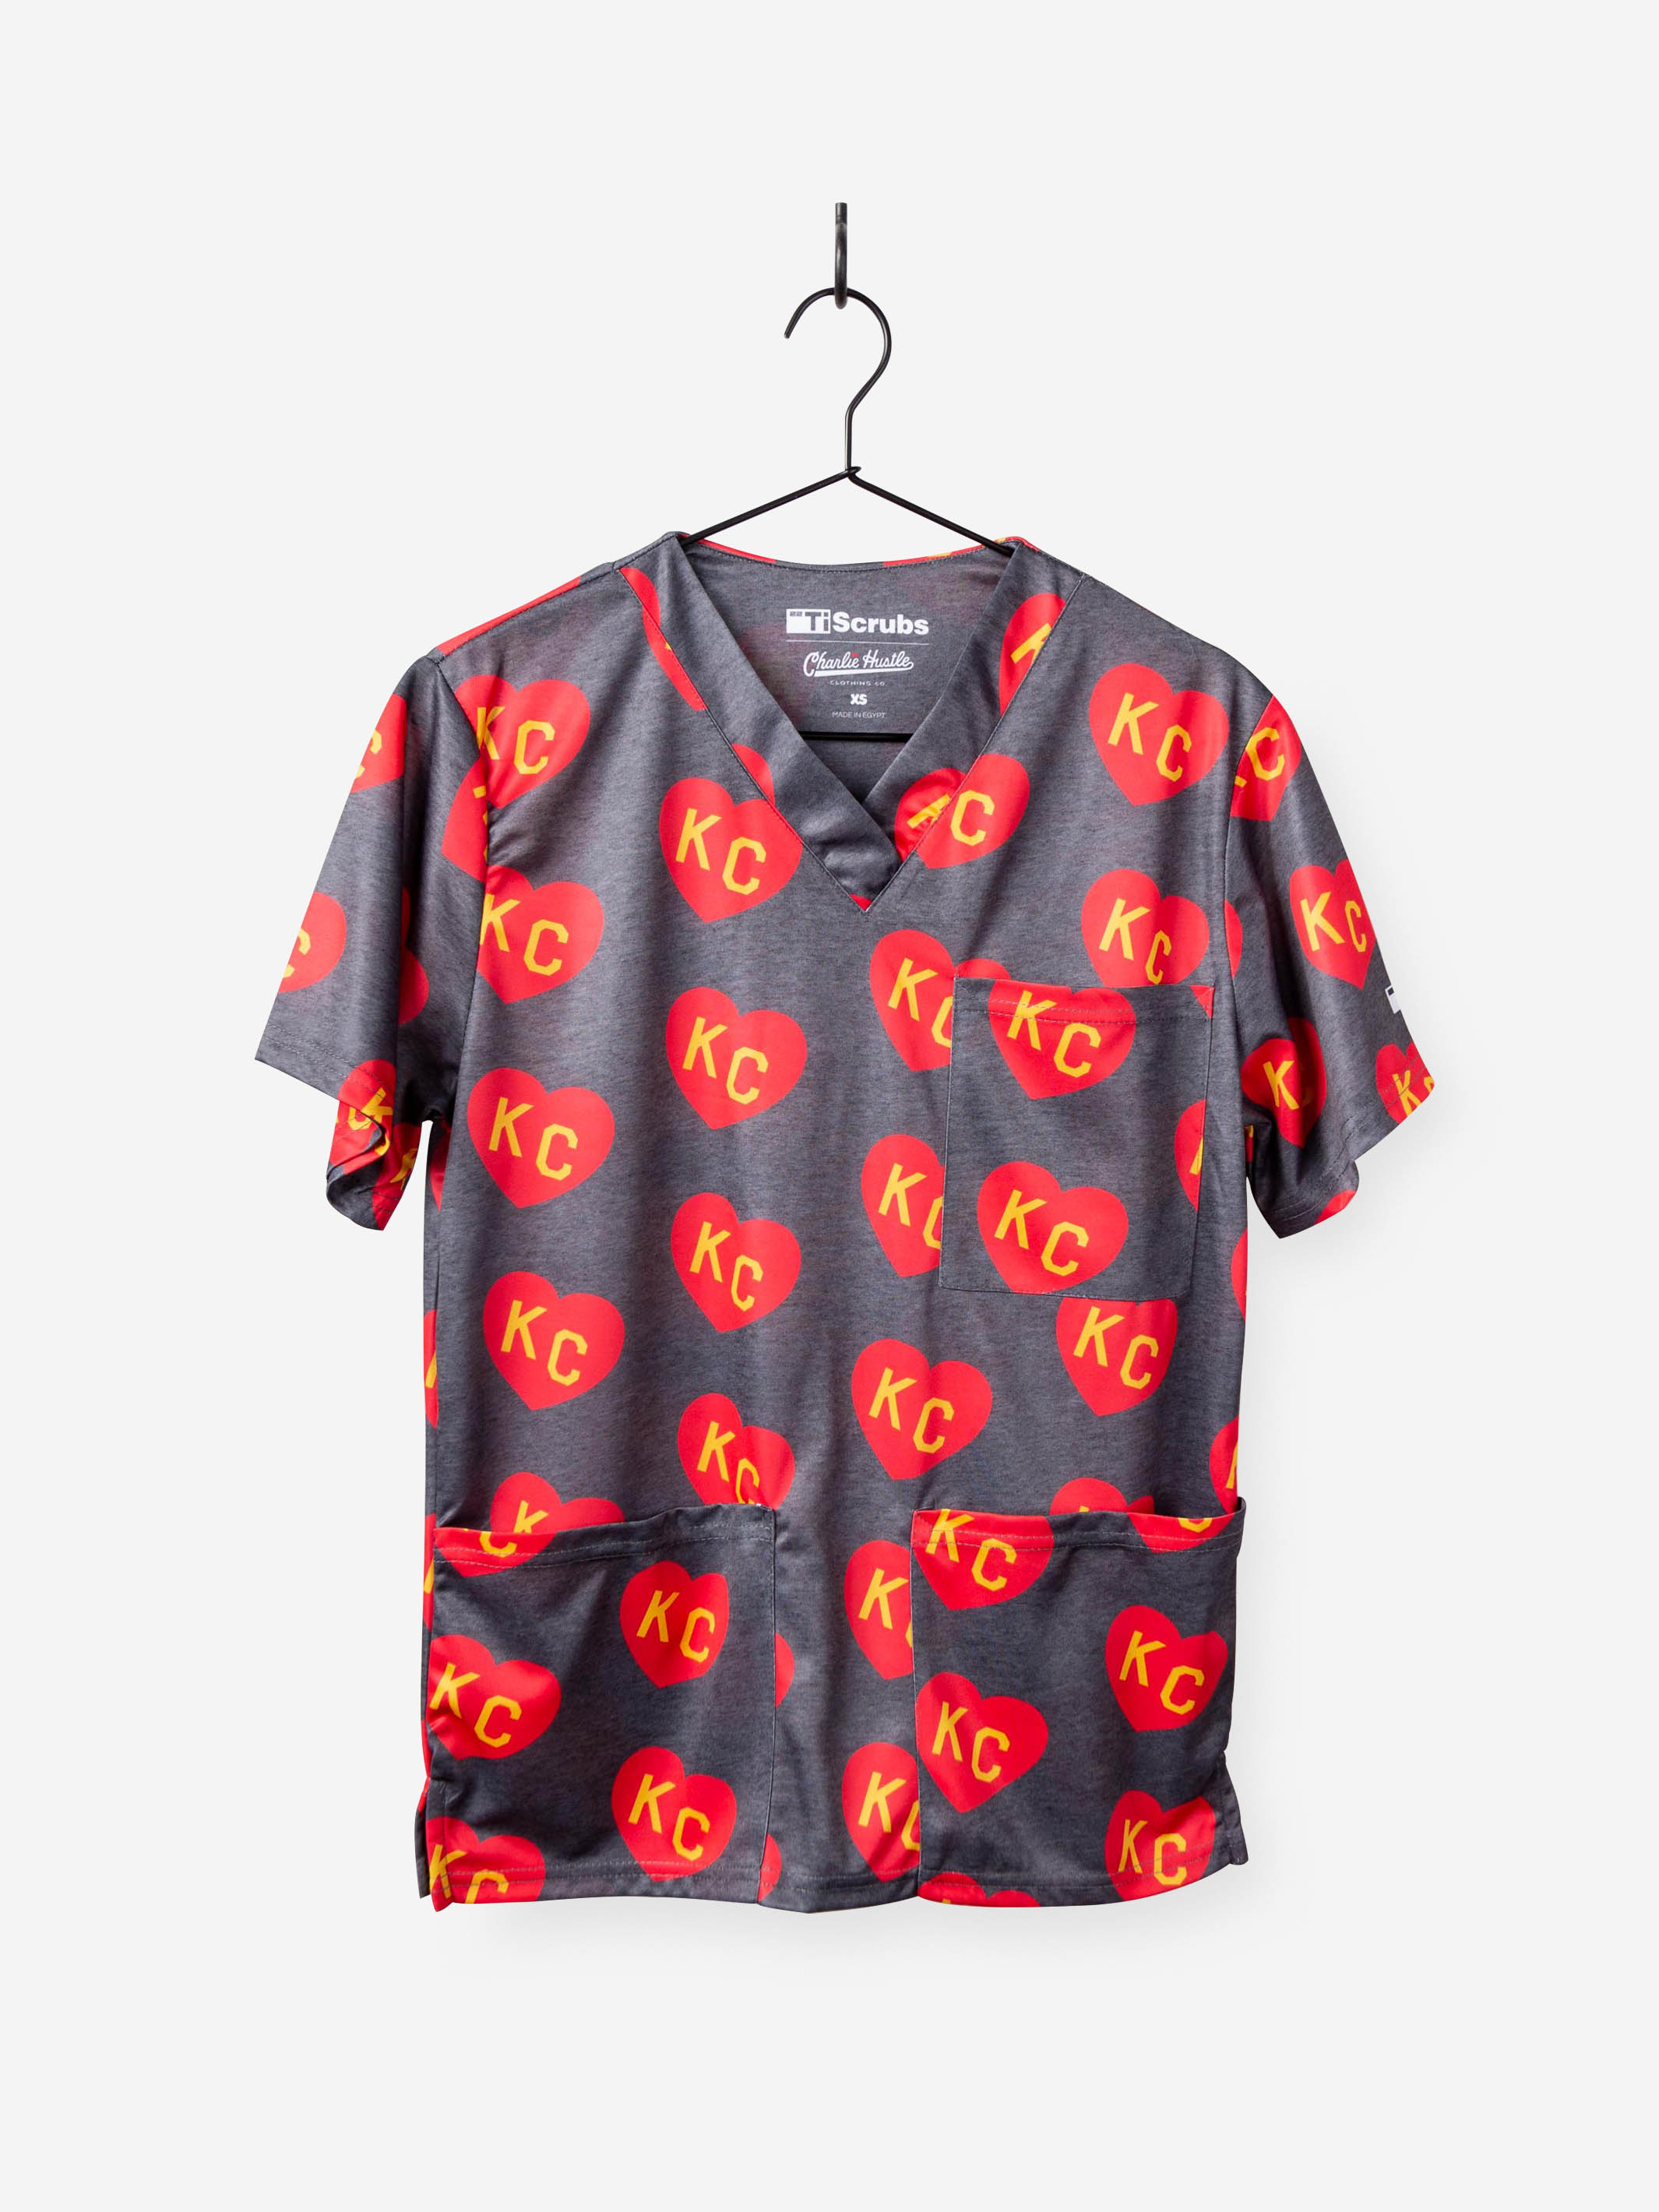 Charlie Hustle Chiefs Scrub Top KC Heart Red and Gold with 3 Pockets for nurses